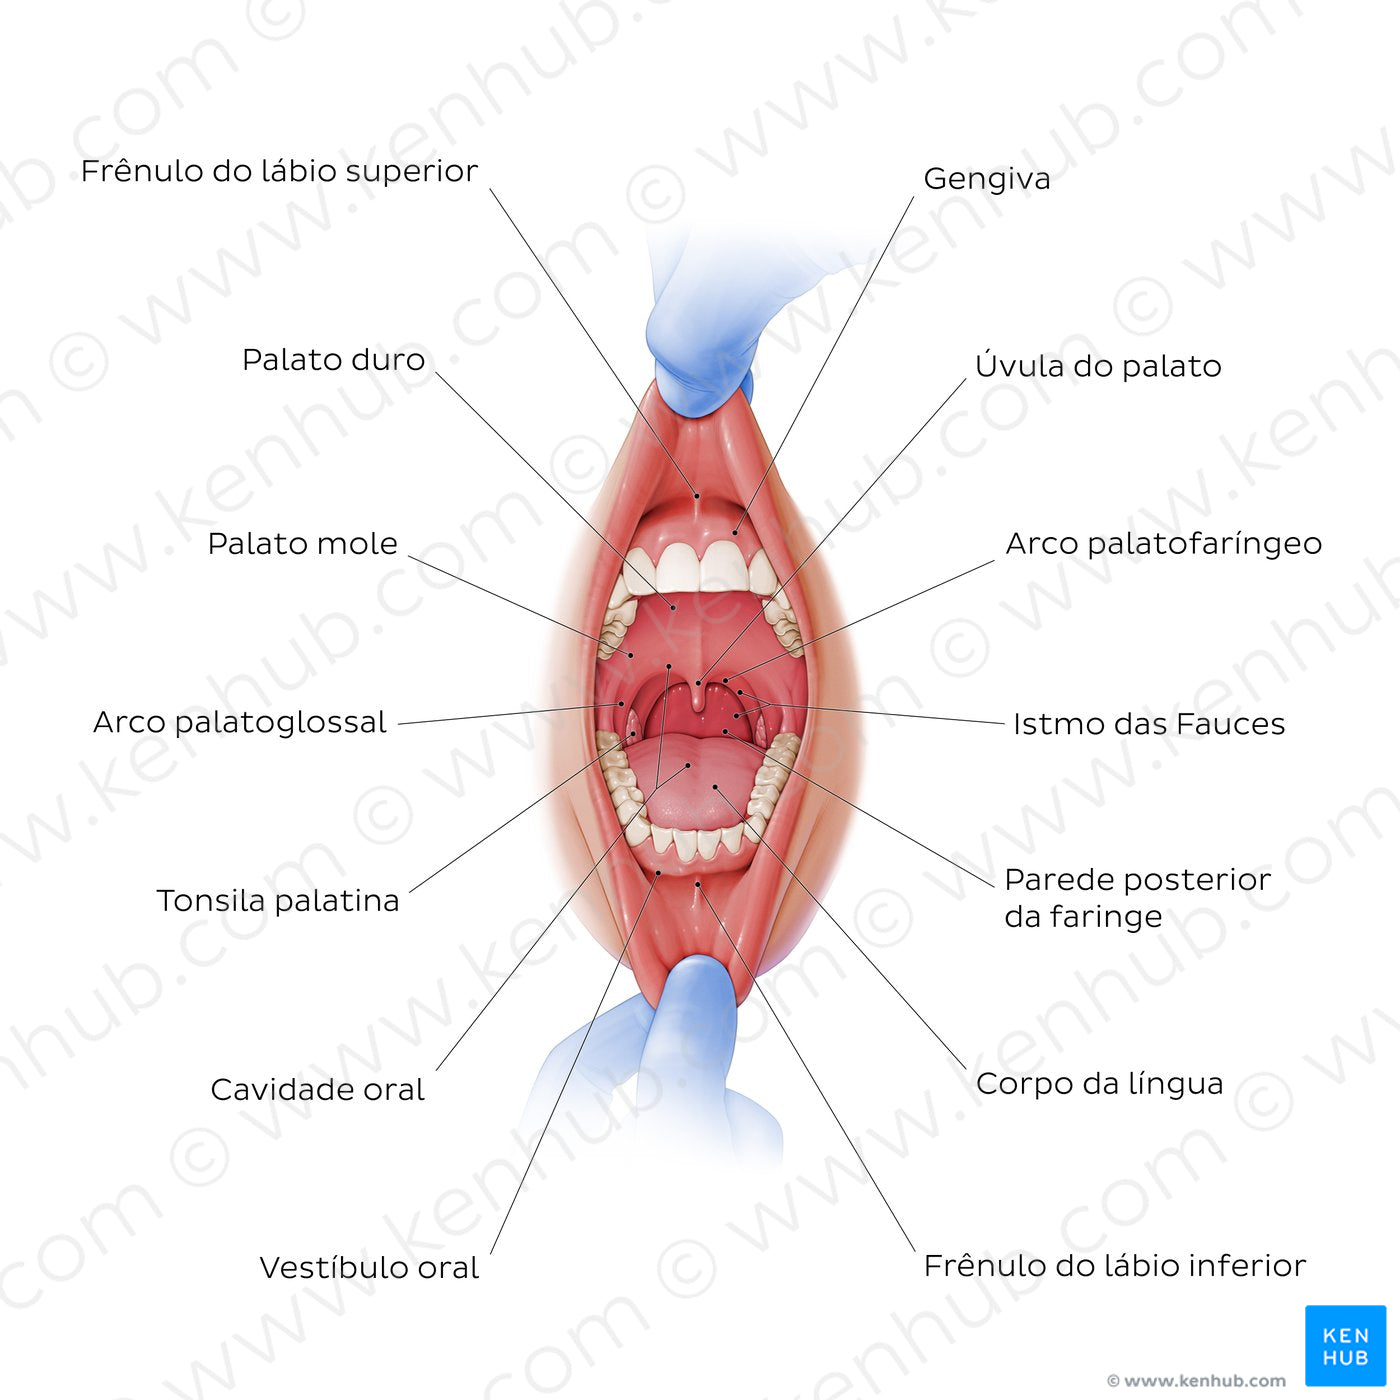 Overview of the oral cavity (Portuguese)